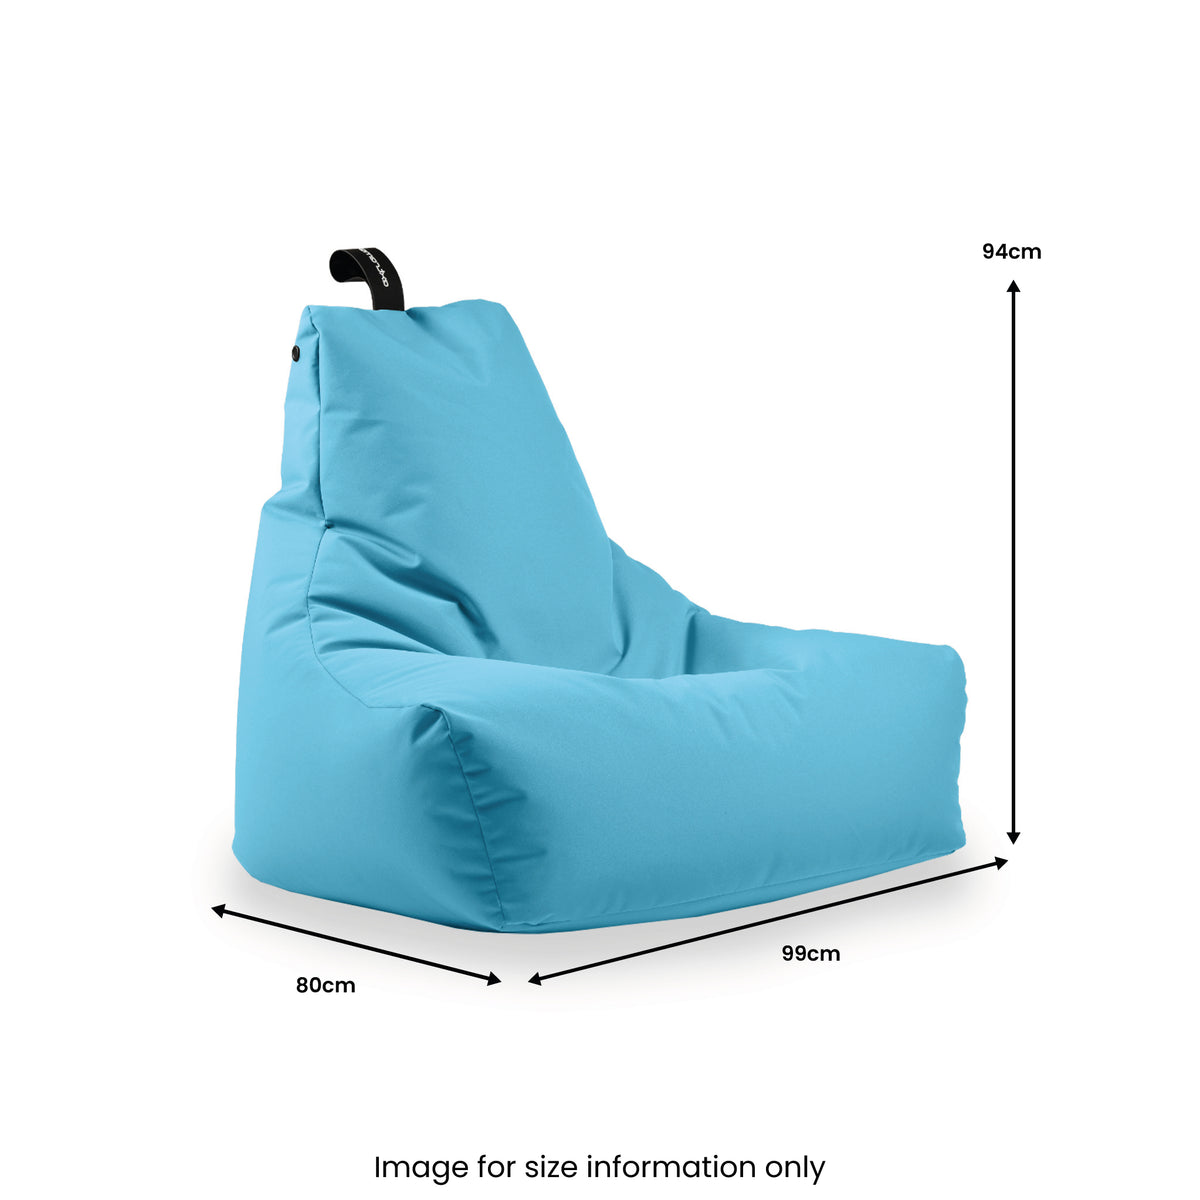 Mighty B Beanbag Dimensions from Roseland Furniture